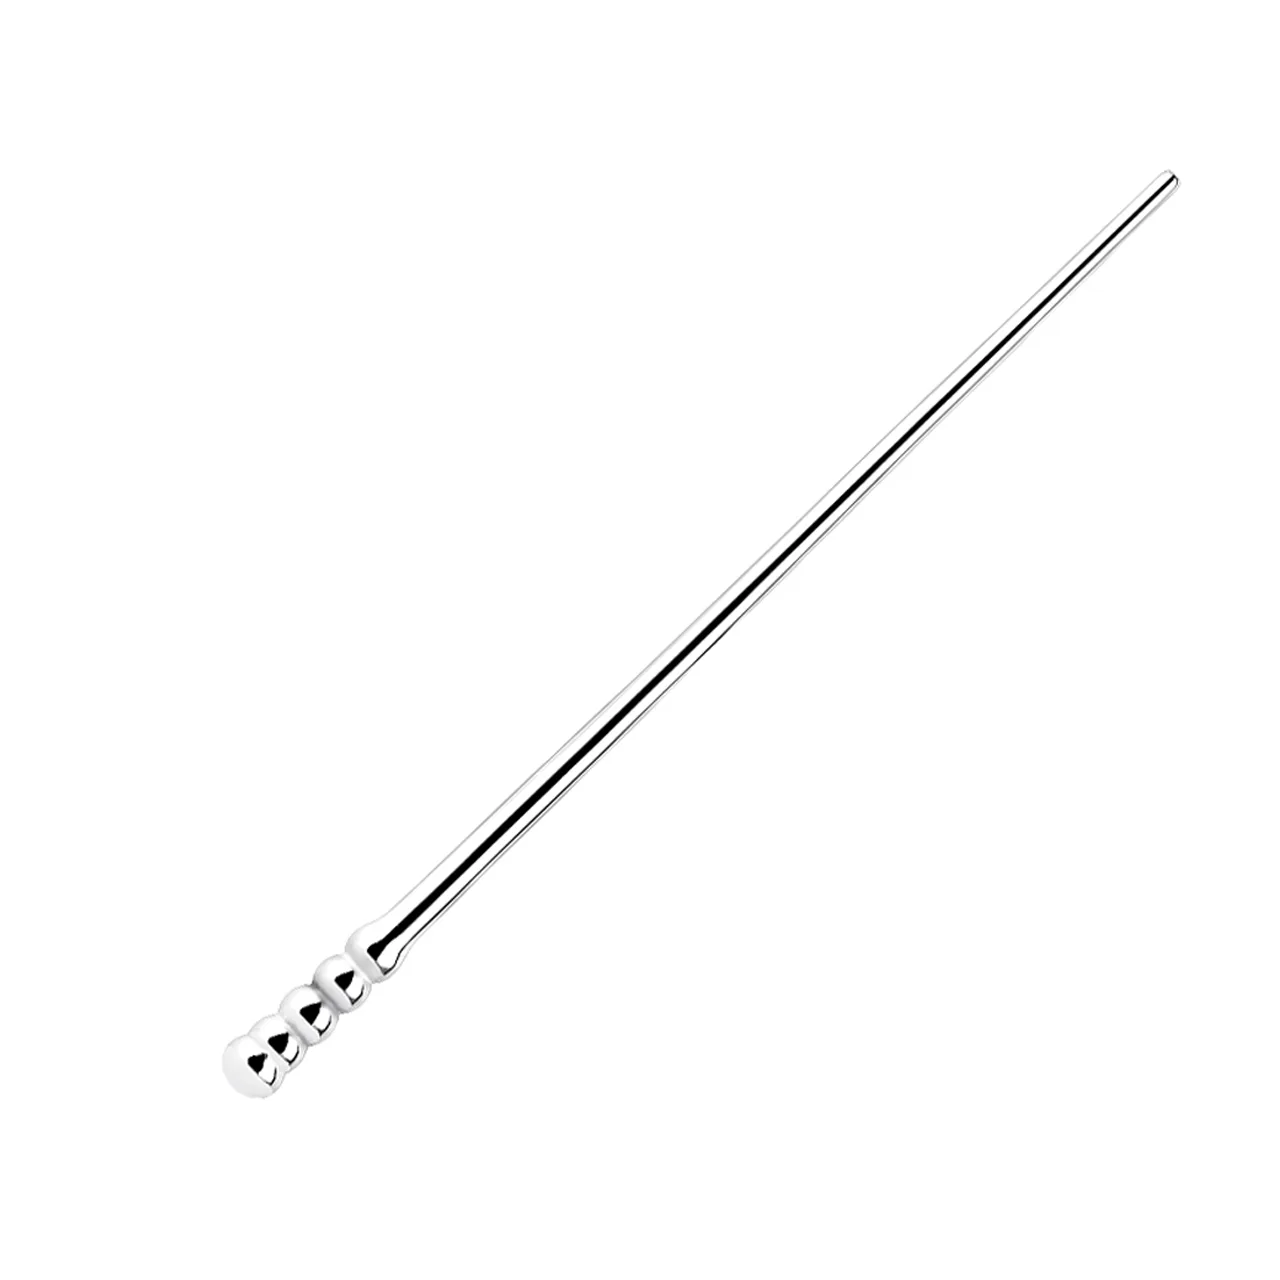 Dip-Stick-Wand-Trainer-4-to-6-mm-OPR-278021-1